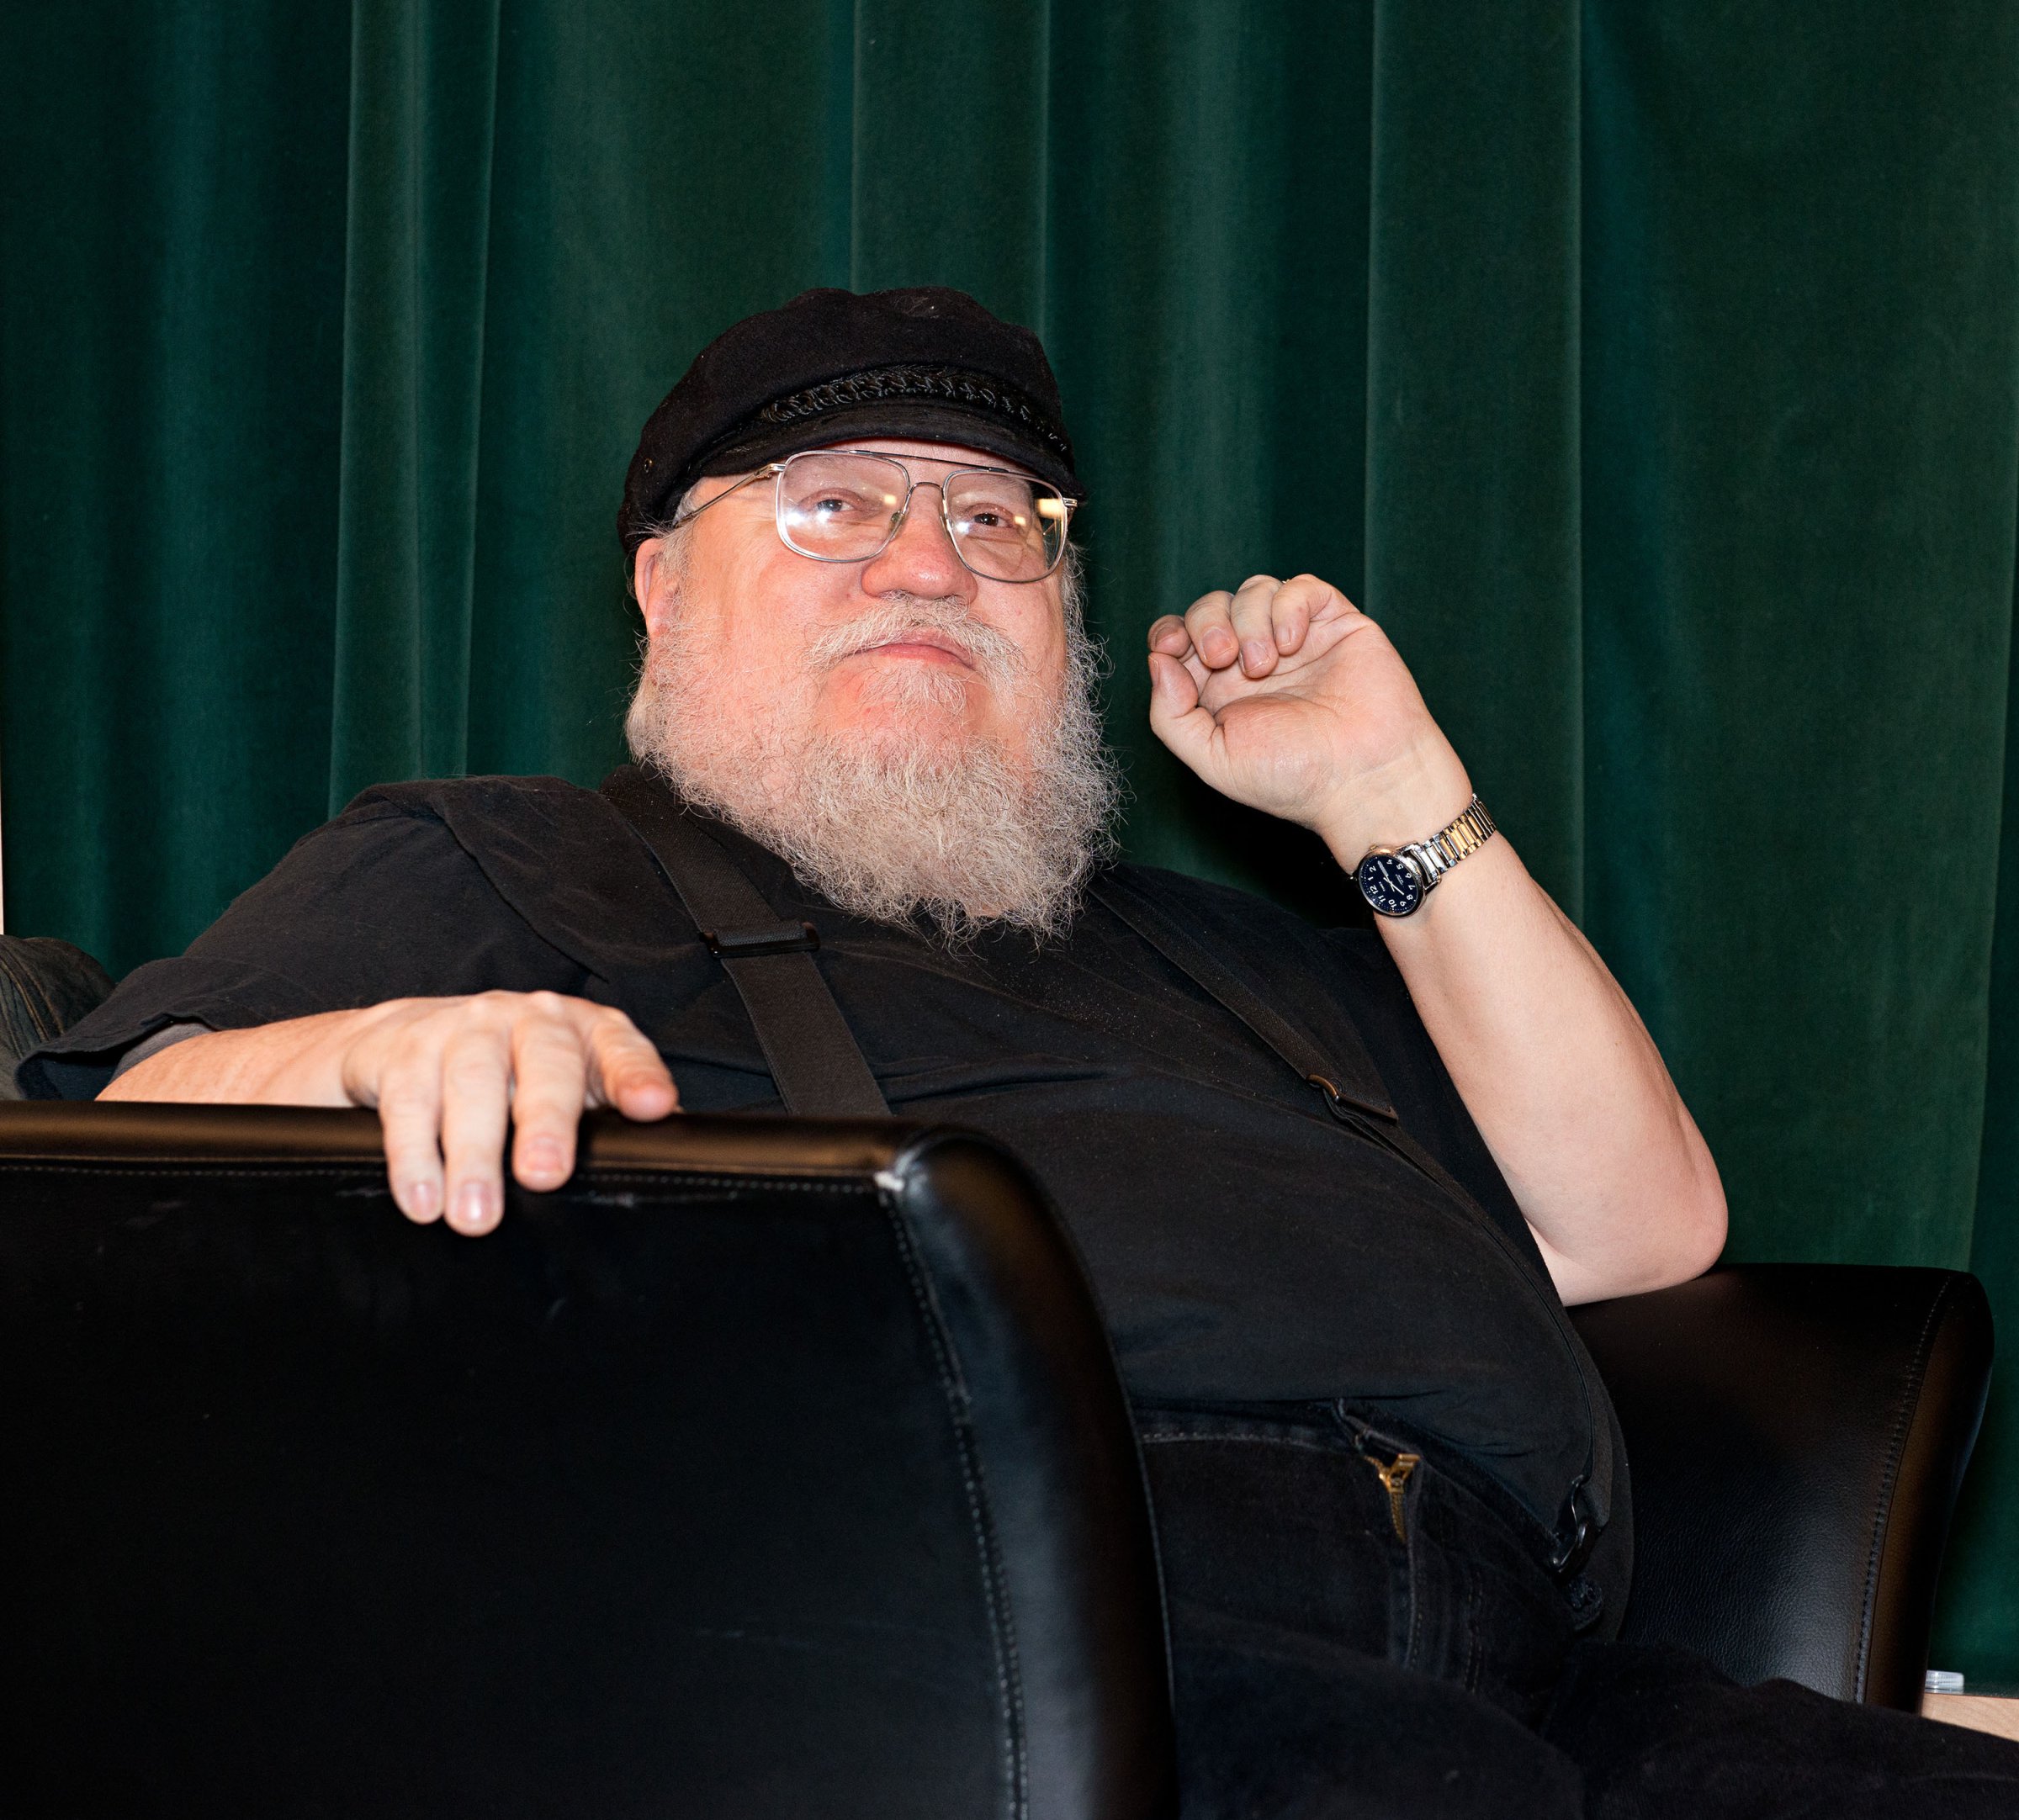 Writer George R. R. Martin participates in a Q &amp; A session following SundanceTV's "Hap & Leonard" Screening at the Jean Cocteau Theater on February 23, 2016 in Santa Fe, New Mexico.